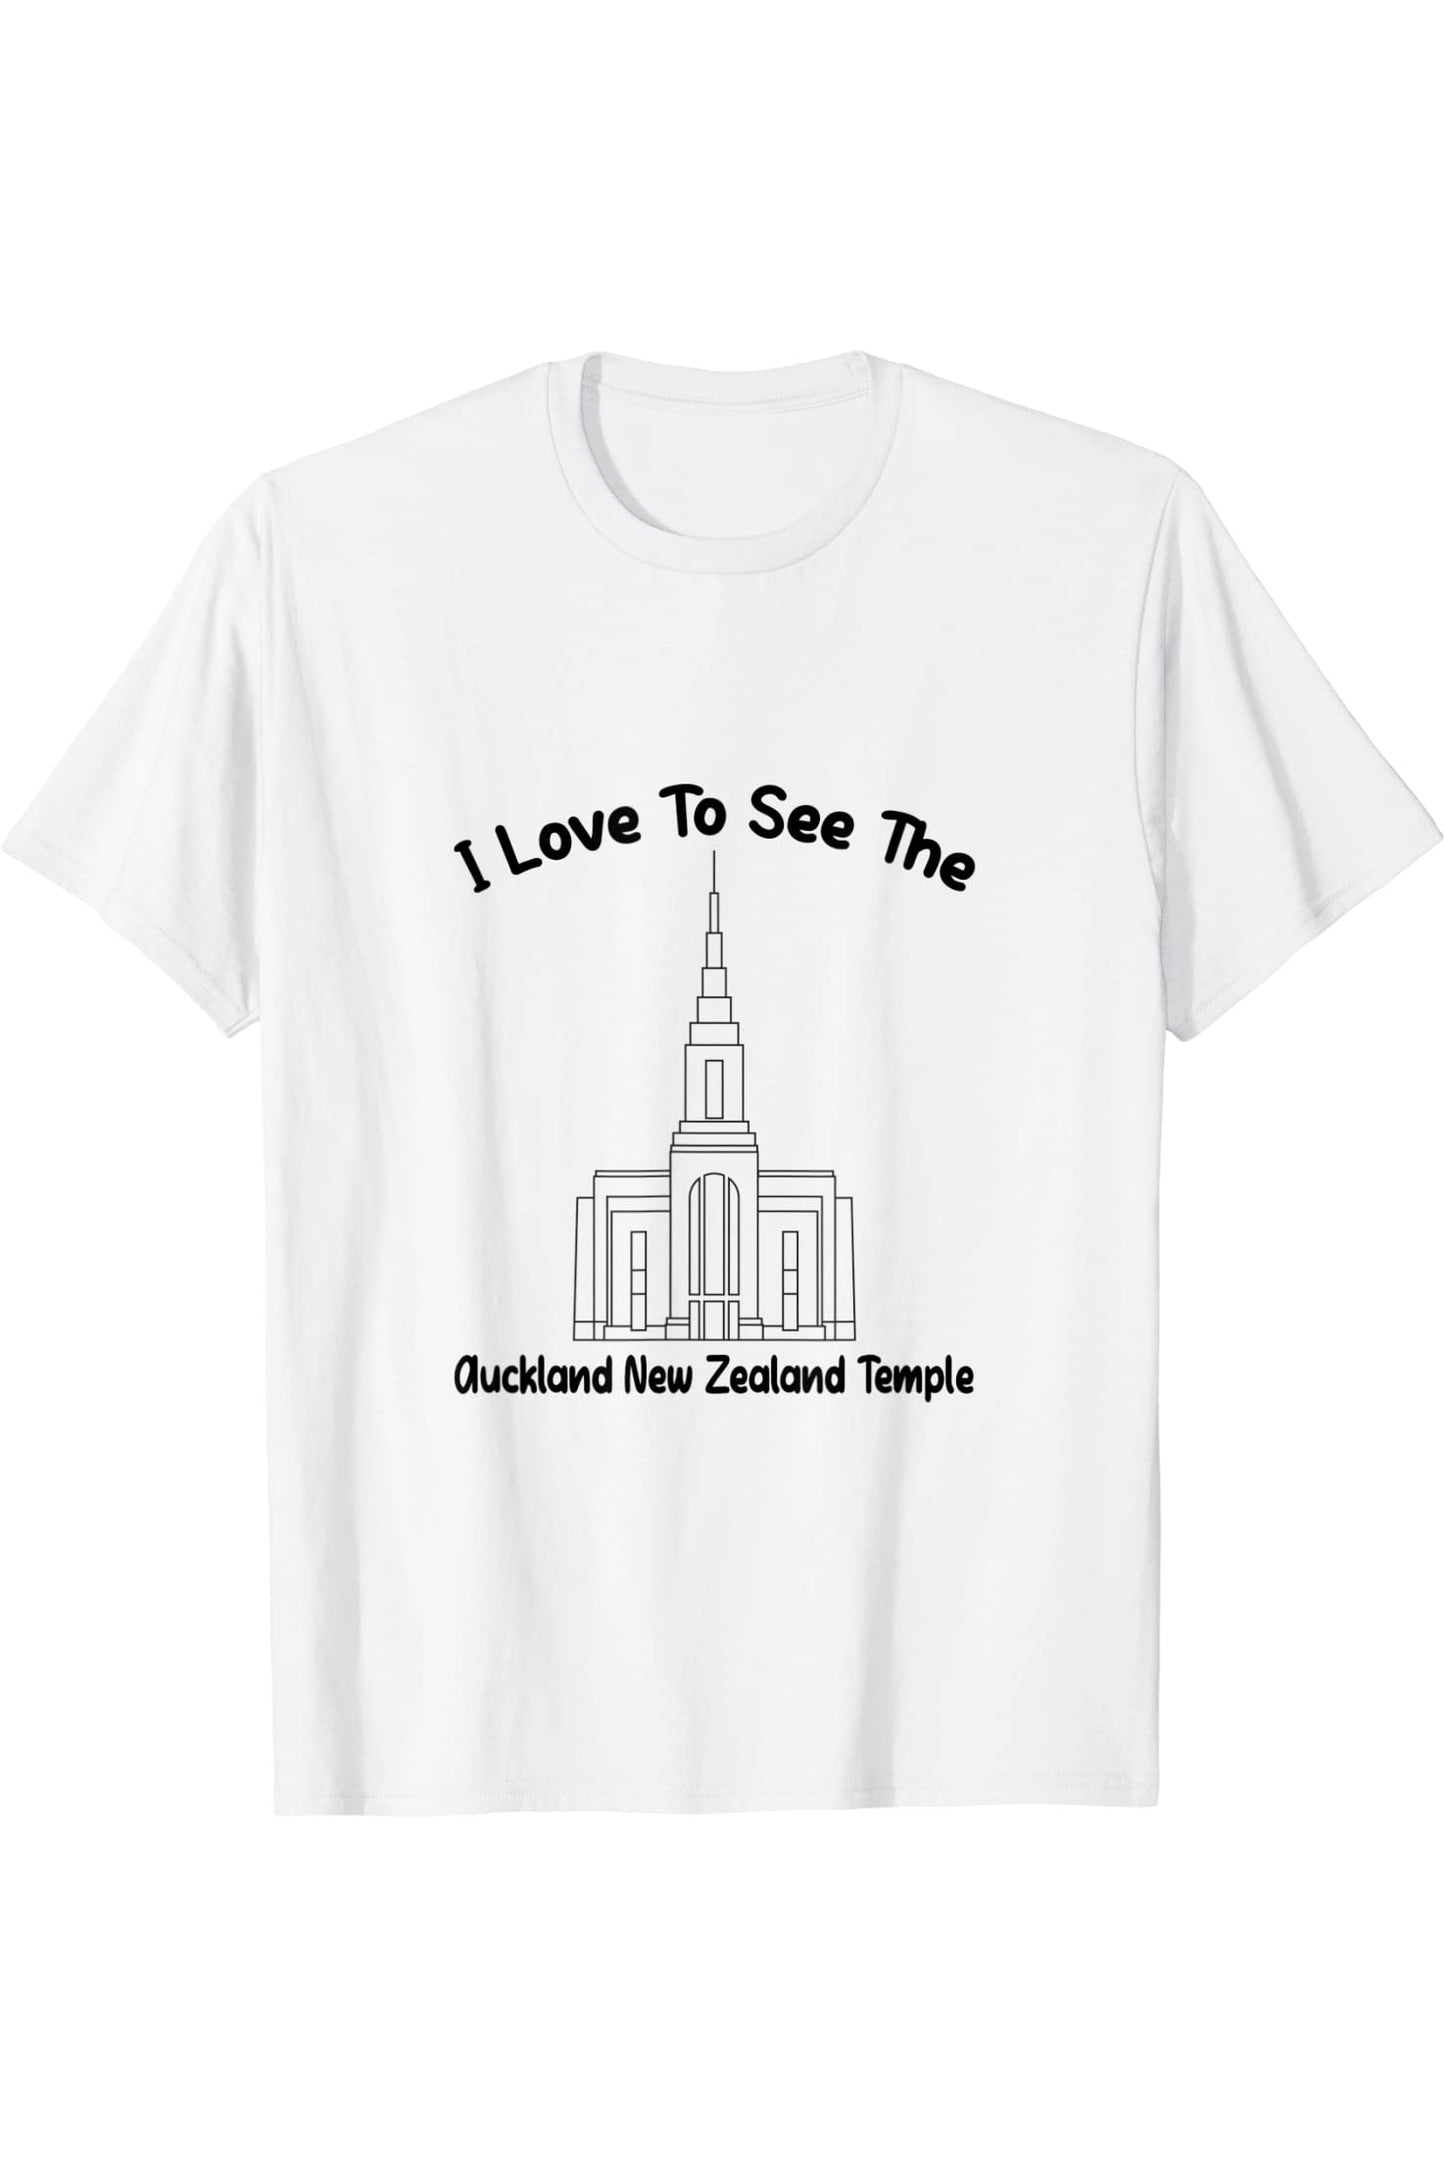 Auckland New Zealand Temple T-Shirt - Primary Style (English) US